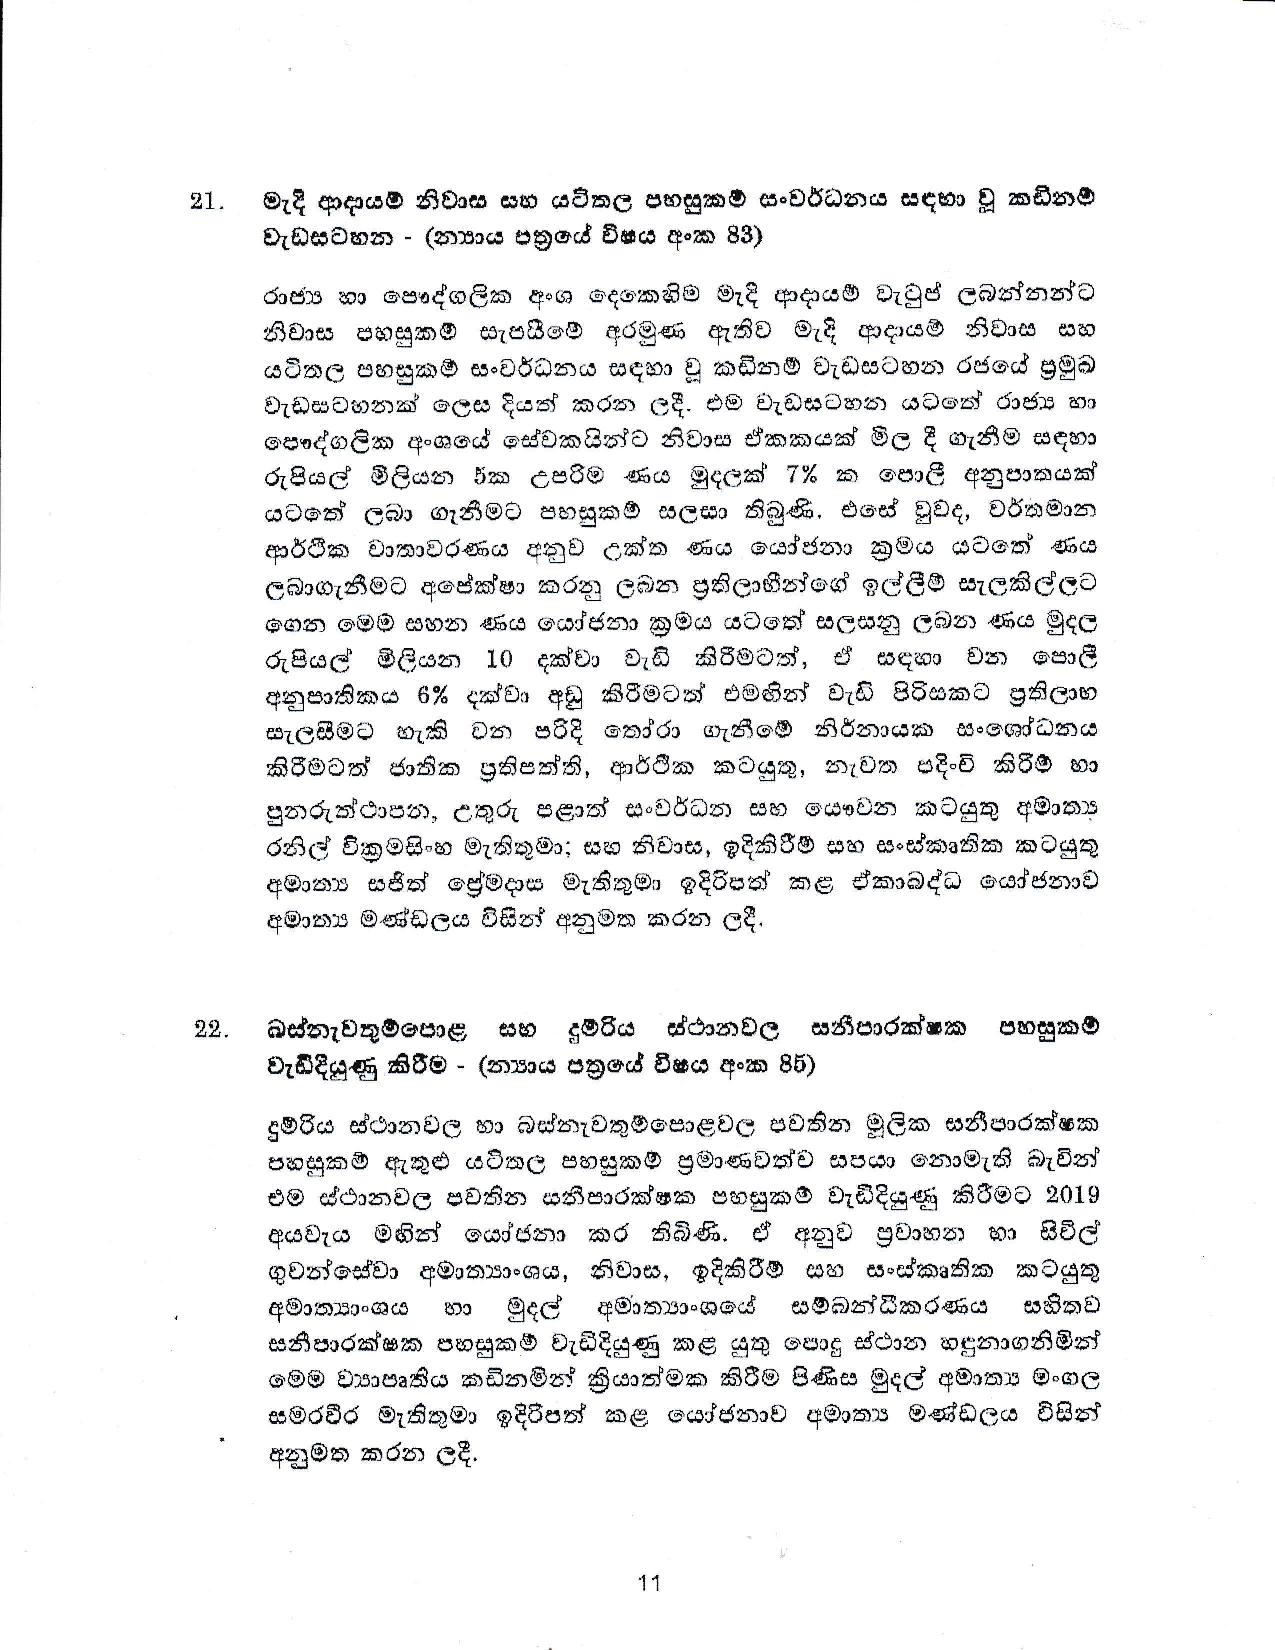 Cabinet Decision on 28.05.2019 page 011